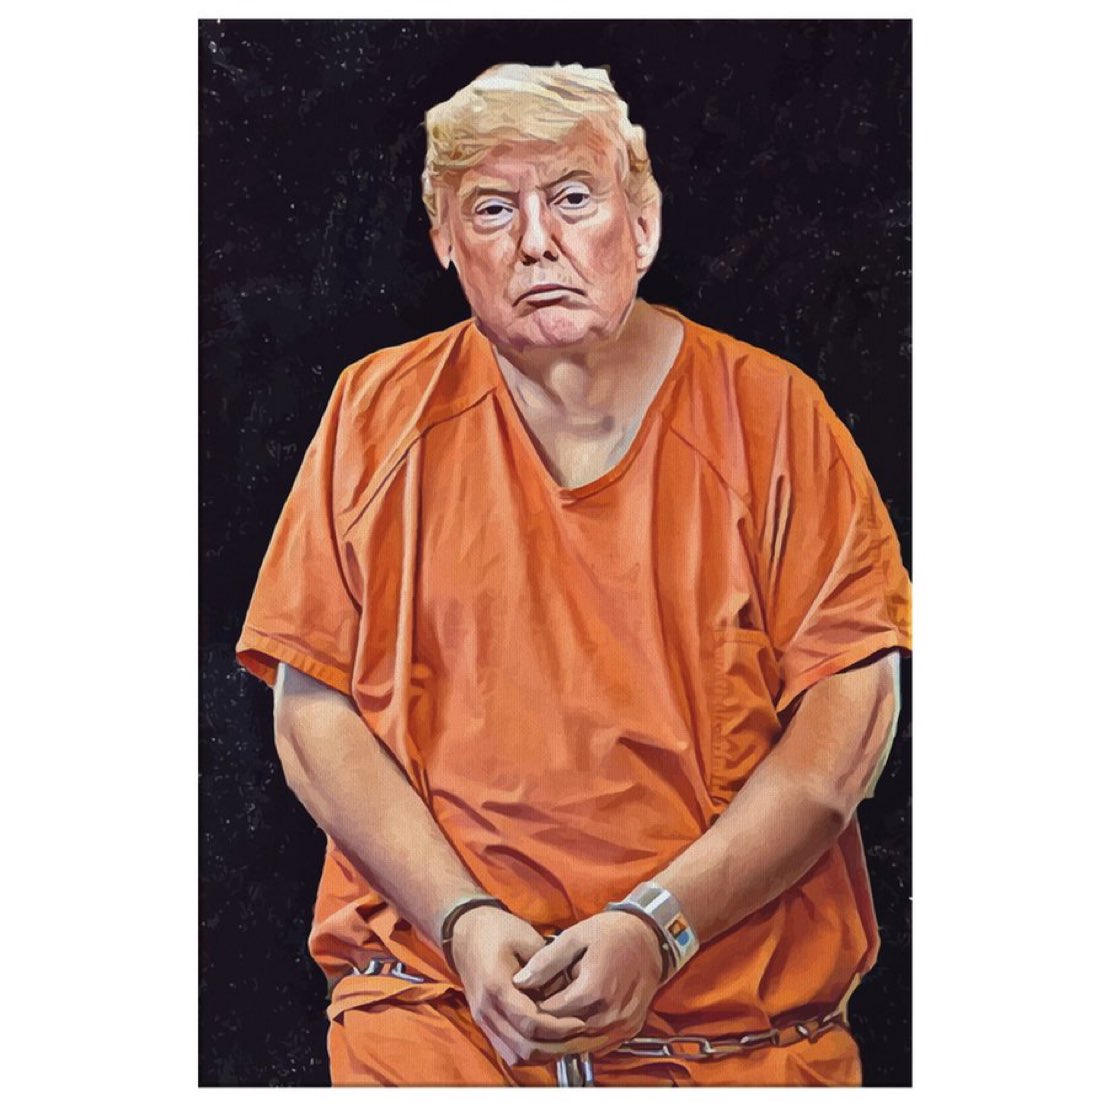 It’s going to happen. When it does, how will you feel about Donald Trump being the first American president to go to jail?